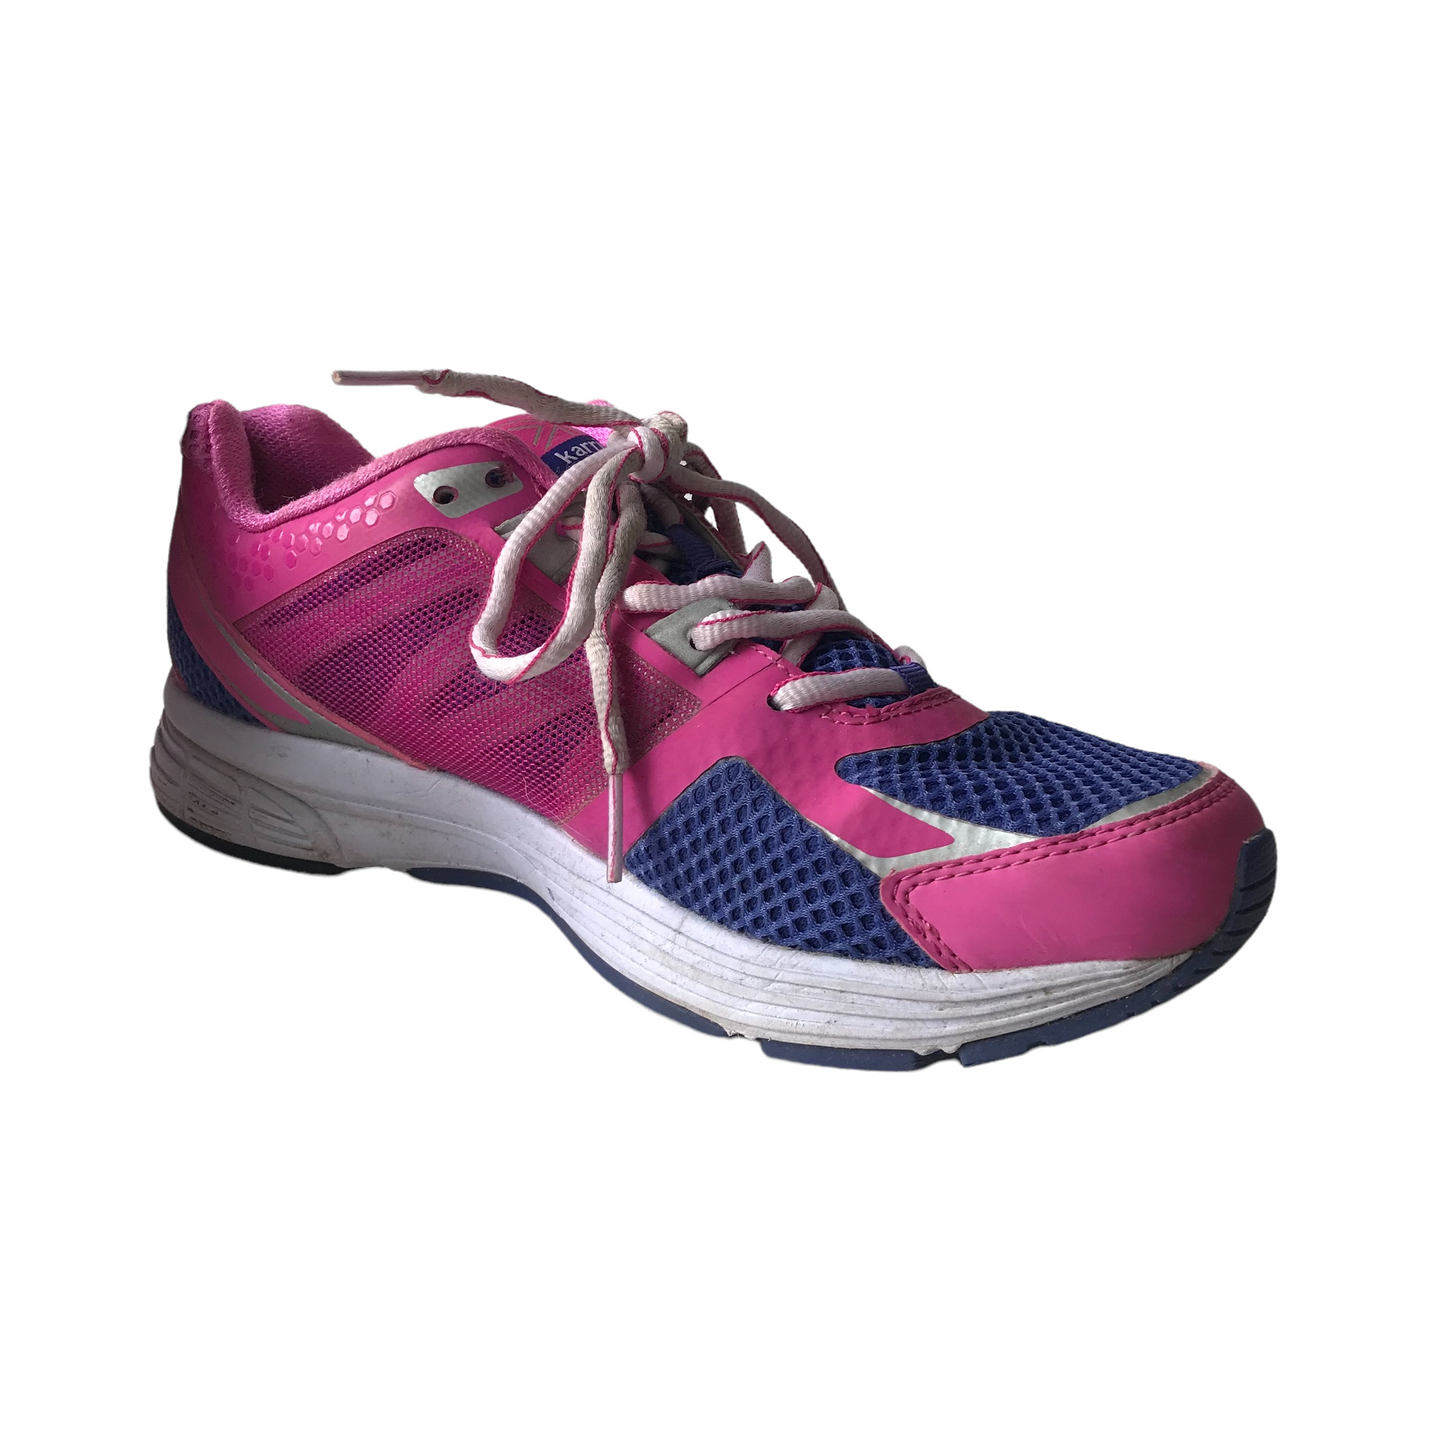 Karrimor Tempo Pink and Purple Running Trainers Size UK 6.5